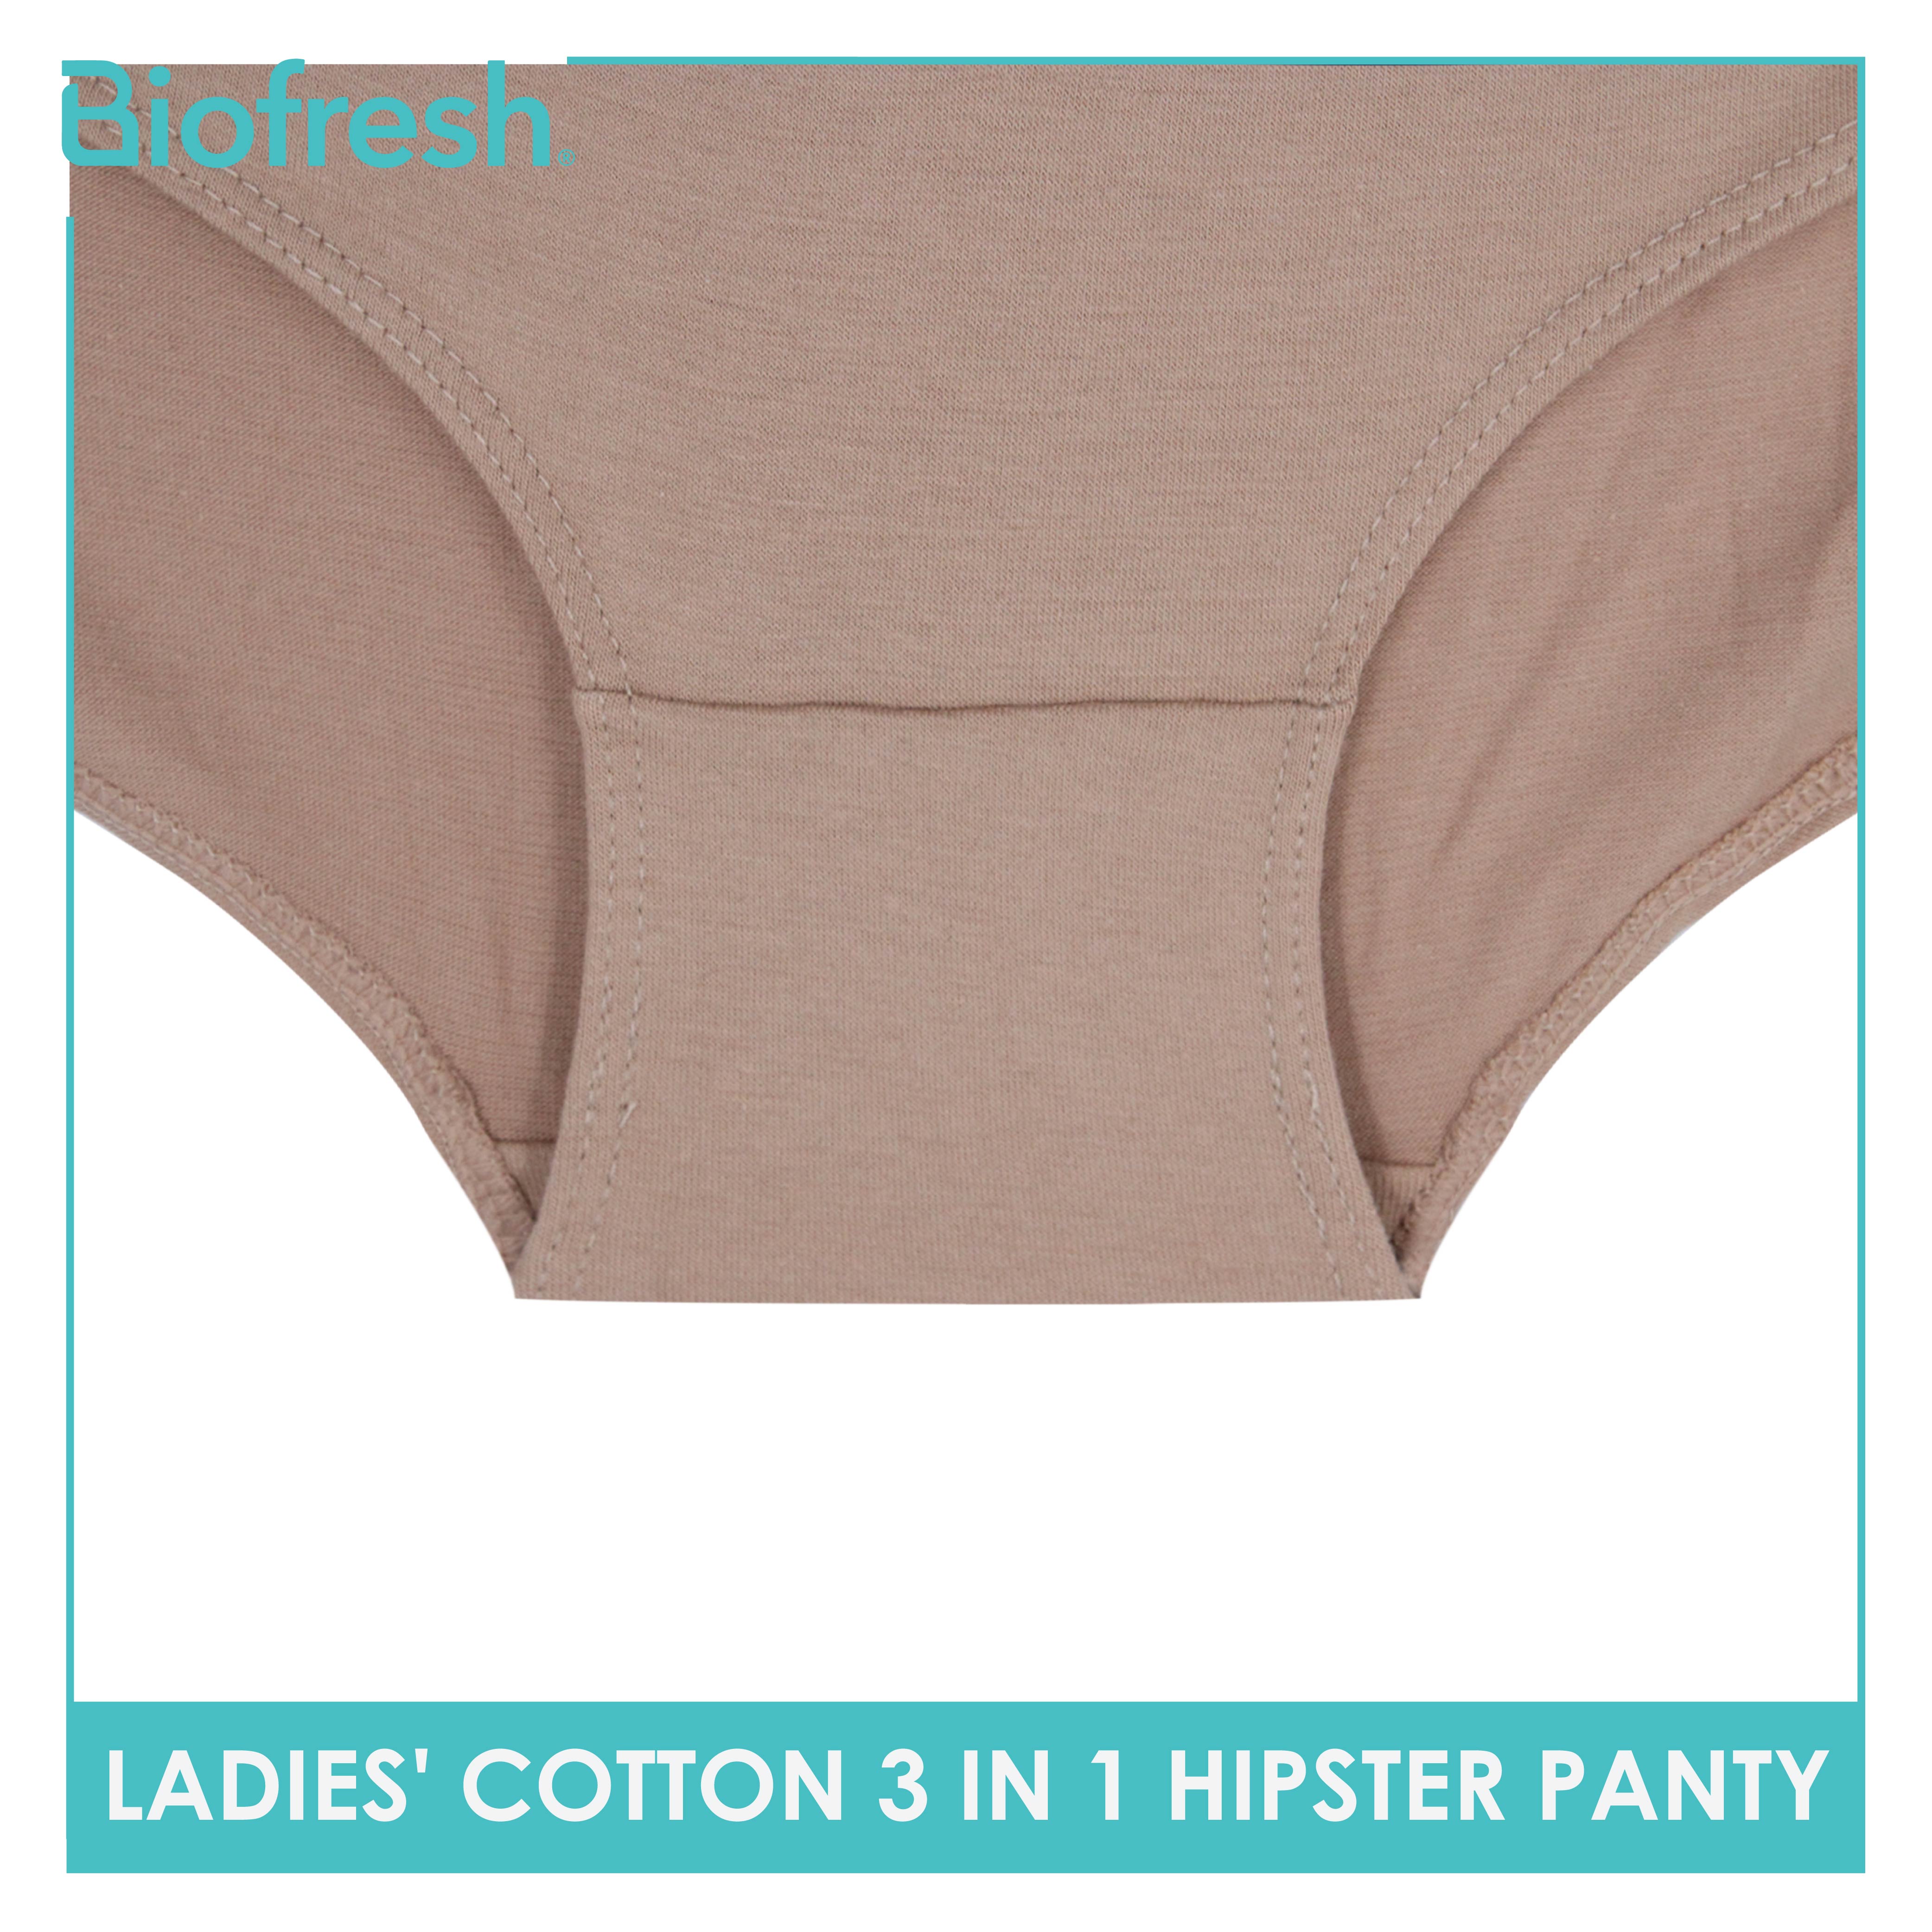 Shero StayFresh Cross Hipster, Underwear/Panty designed for Sensitive Skin,  Odor Control, Yeast Infections, Anti-Bacterial